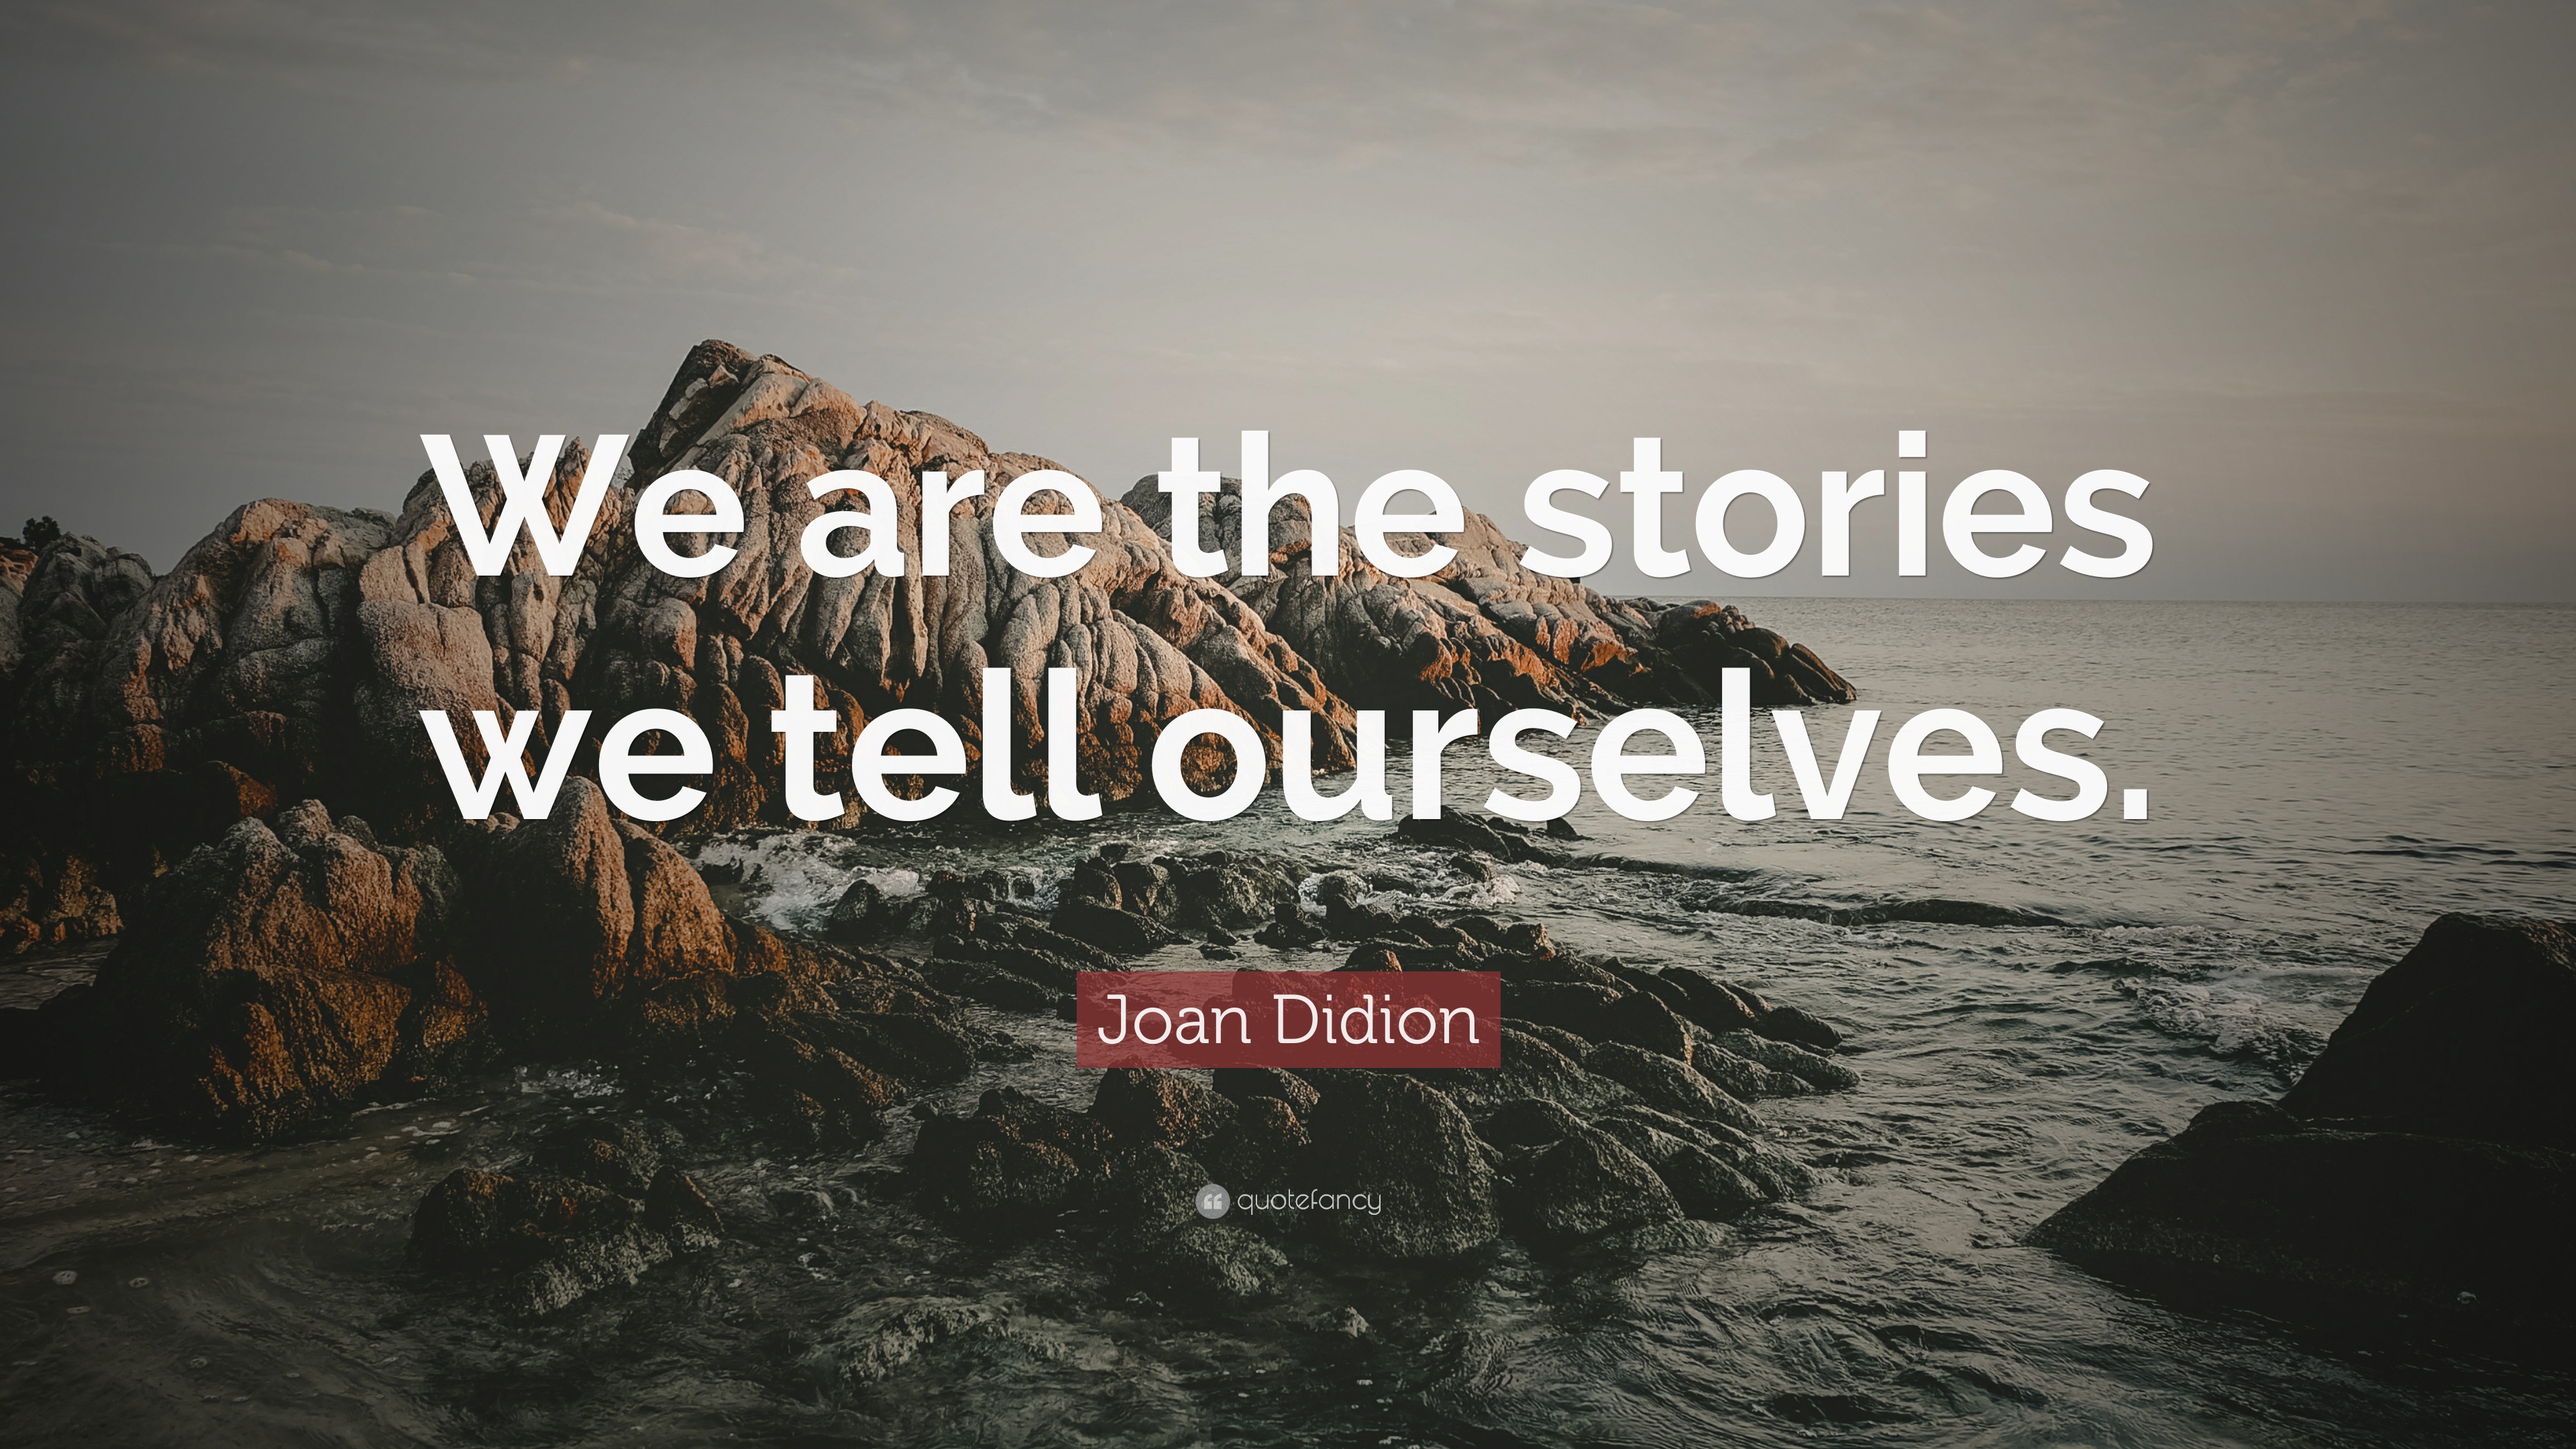 joan didion stories we tell ourselves